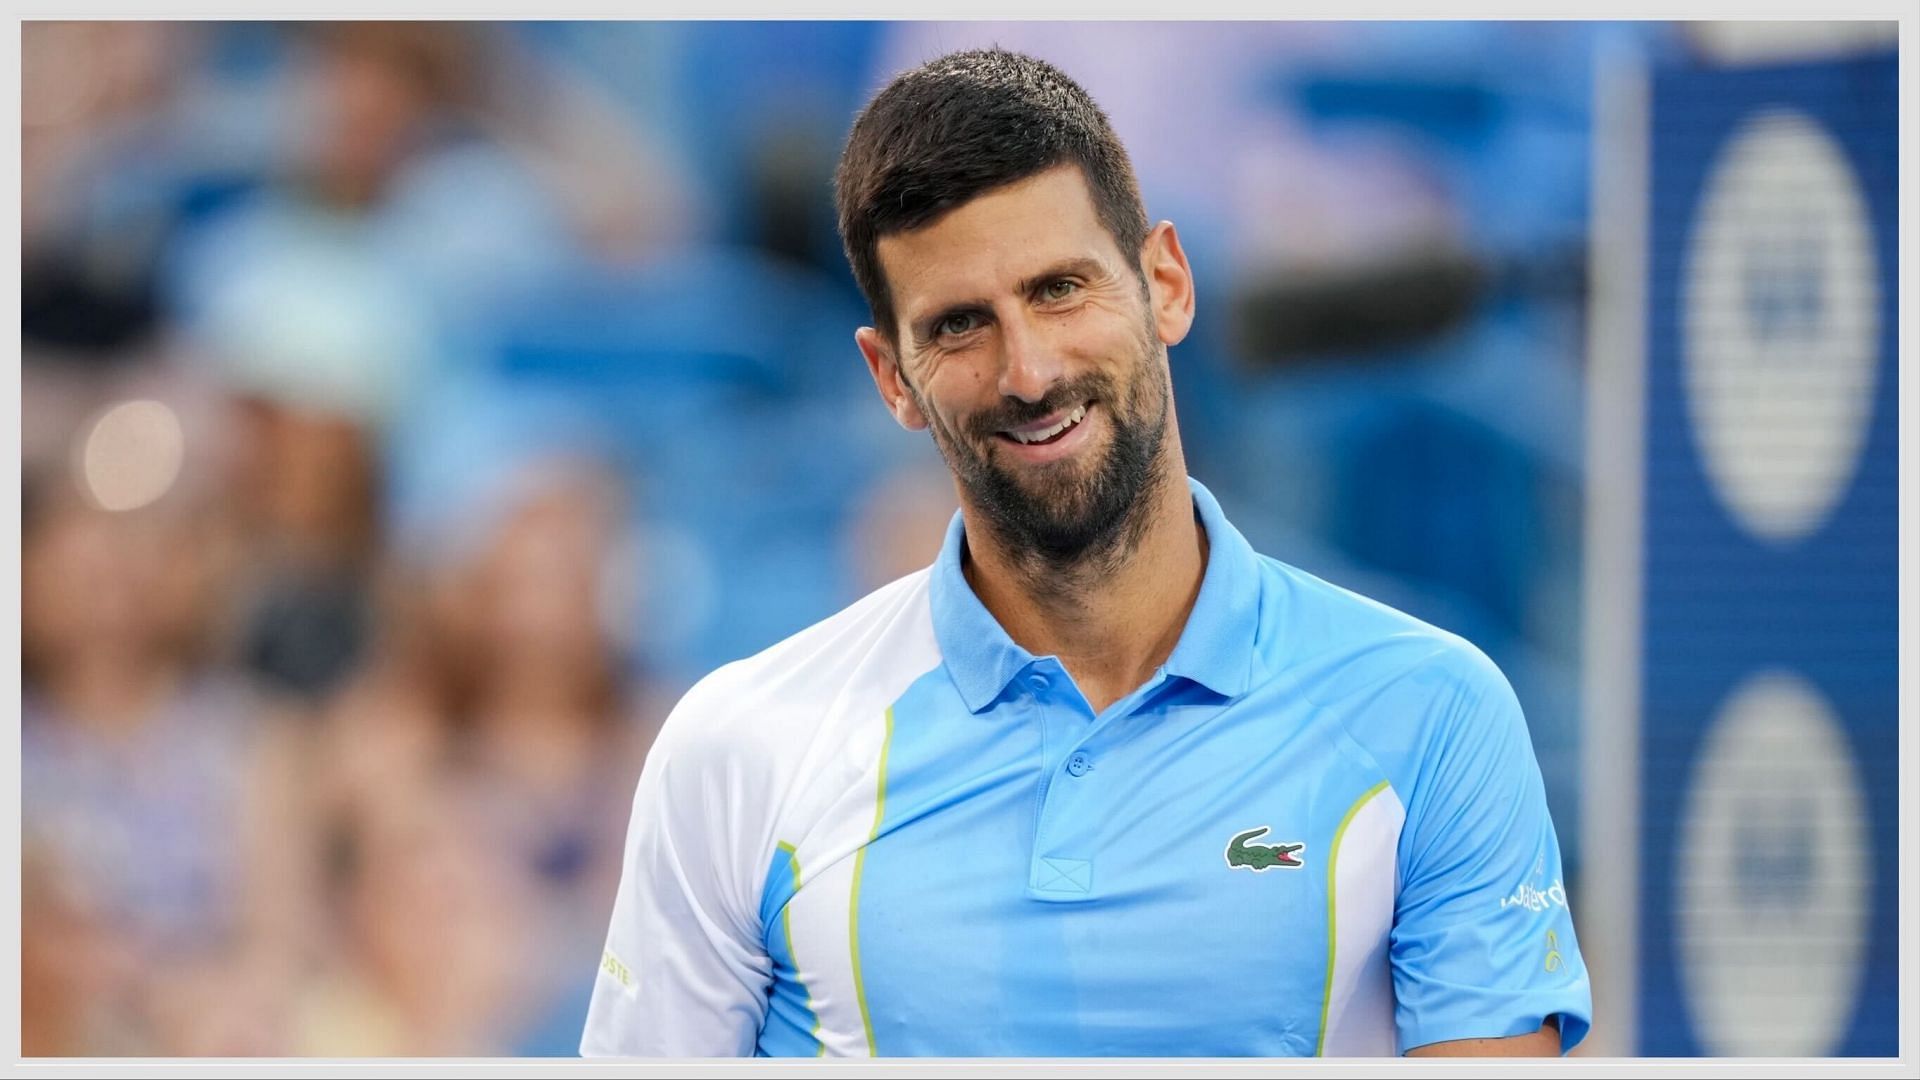 Djokovic has incomparable numbers to his credit as a tennis player